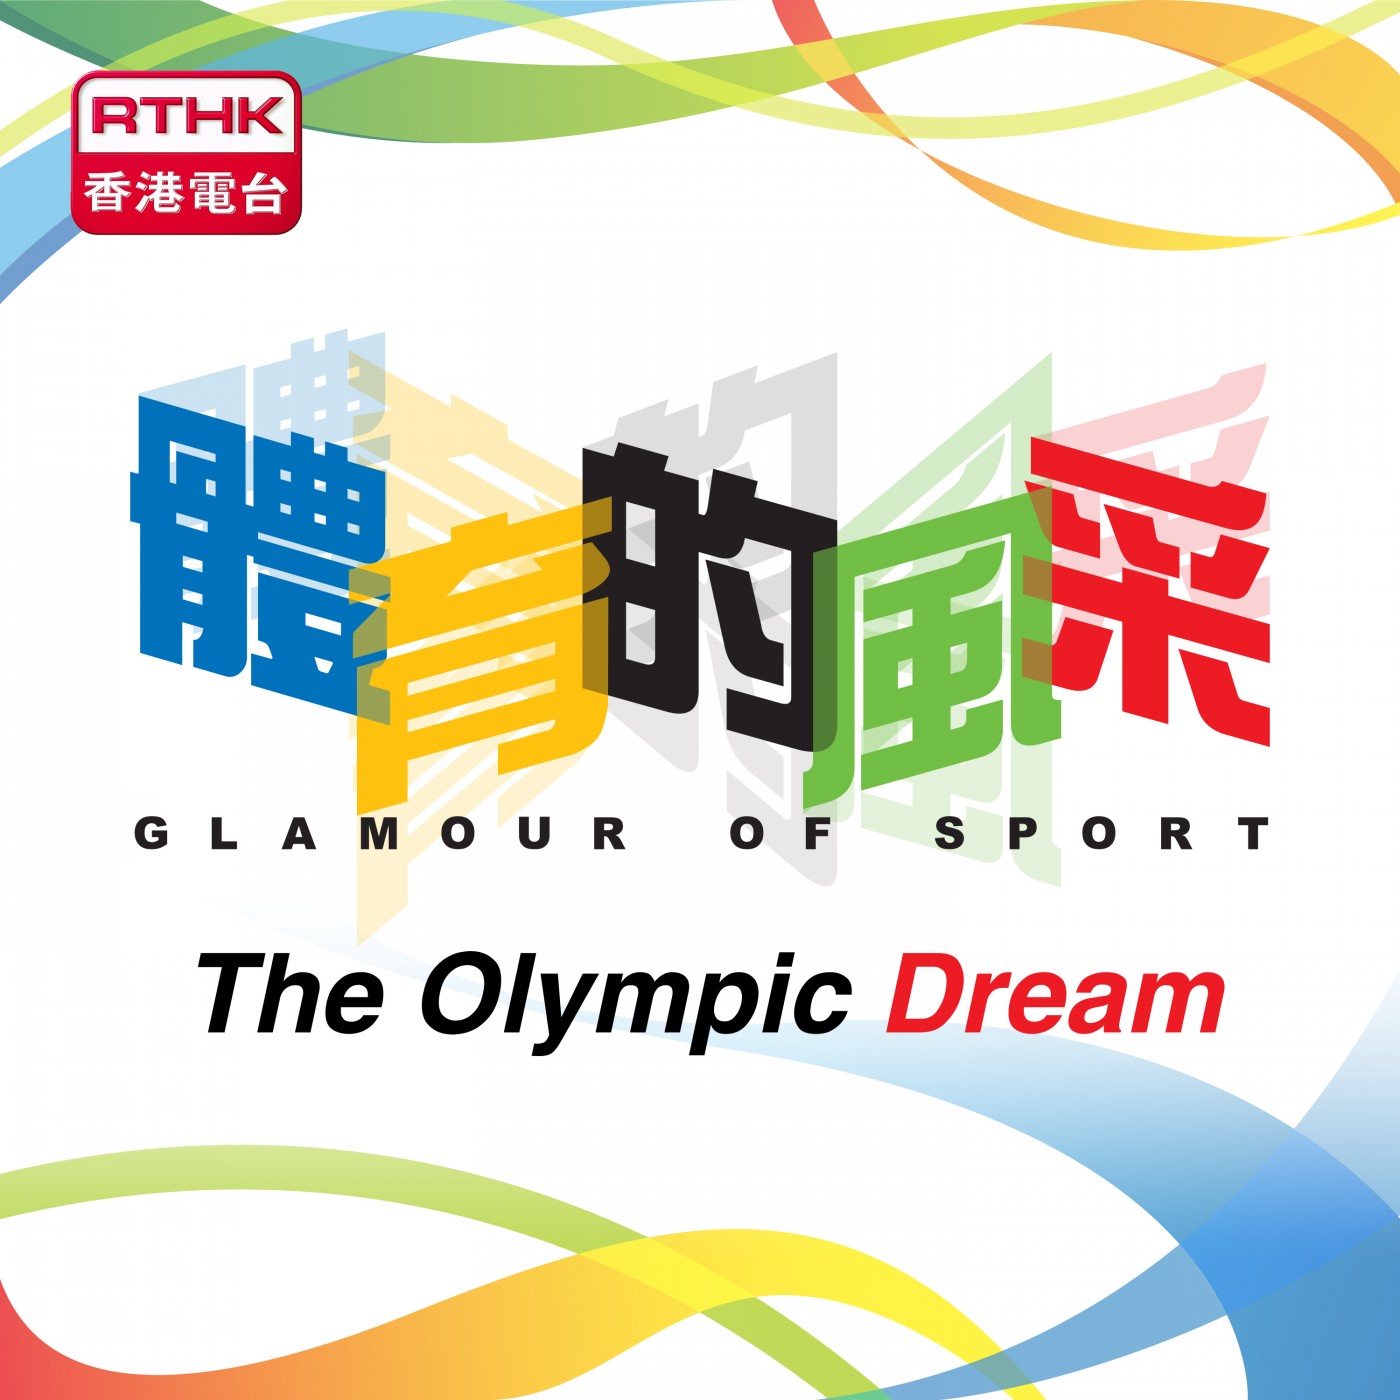 RTHK: Glamour of Sport - The Olympic Dream